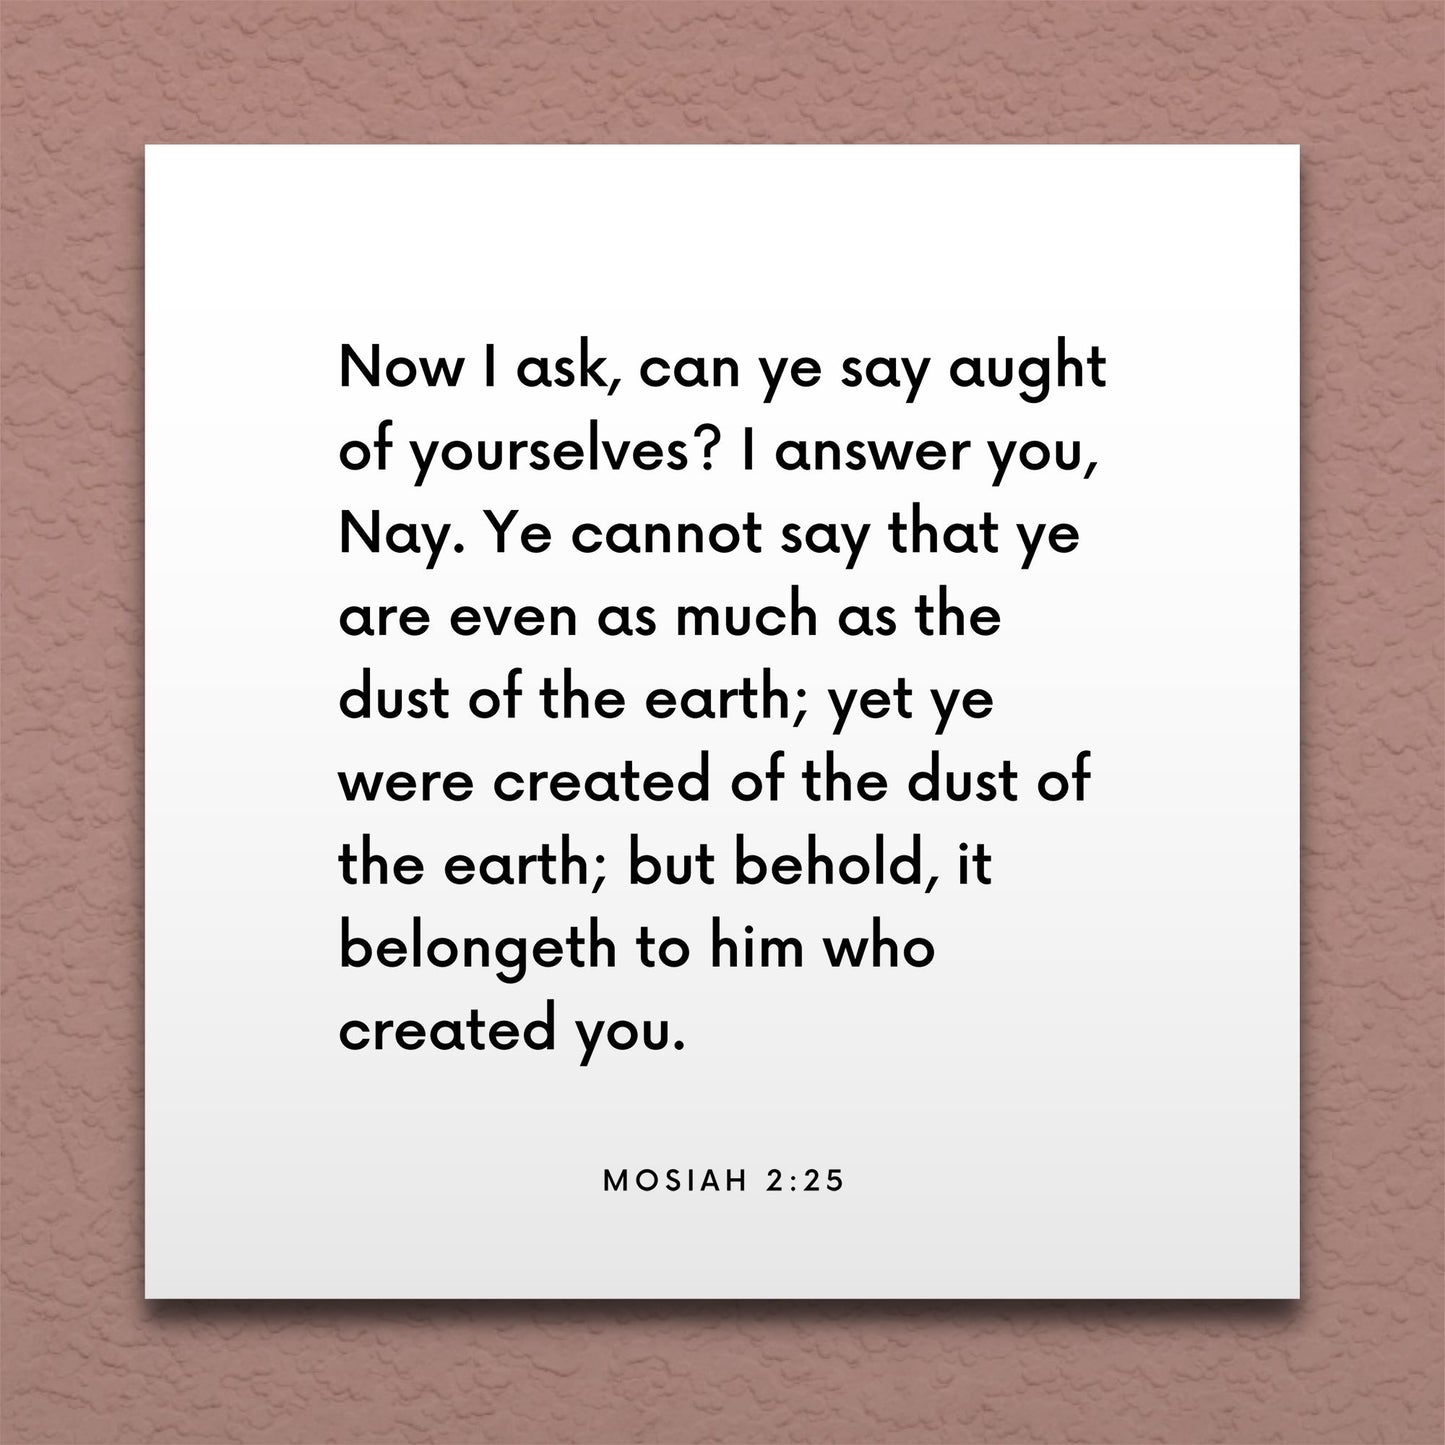 Wall-mounted scripture tile for Mosiah 2:25 - "Now I ask, can ye say aught of yourselves?"